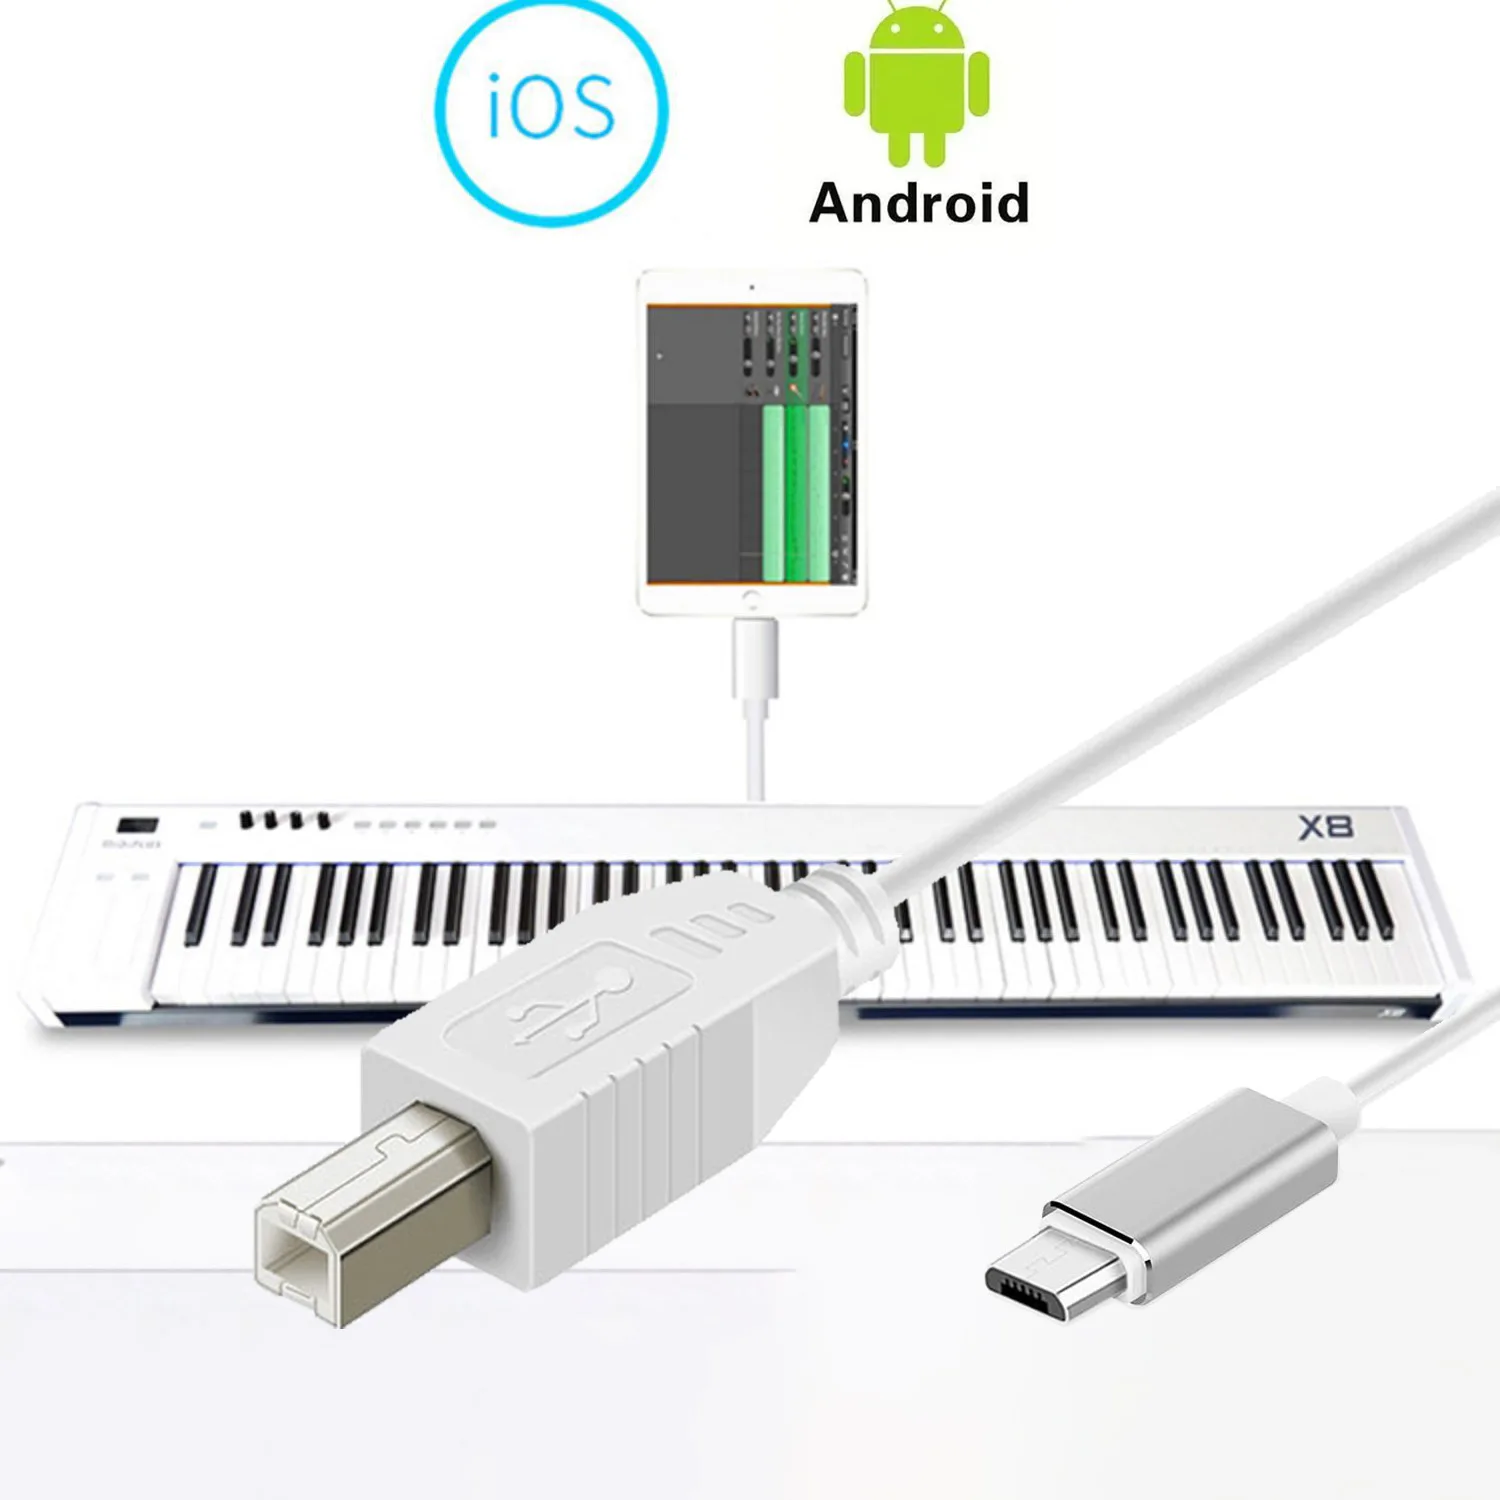 USB B OTG Cable Adapter For iPhone iPad for Android Samsung Xiaomi To Midi Controller Electronic Music Instrument Printer Cable